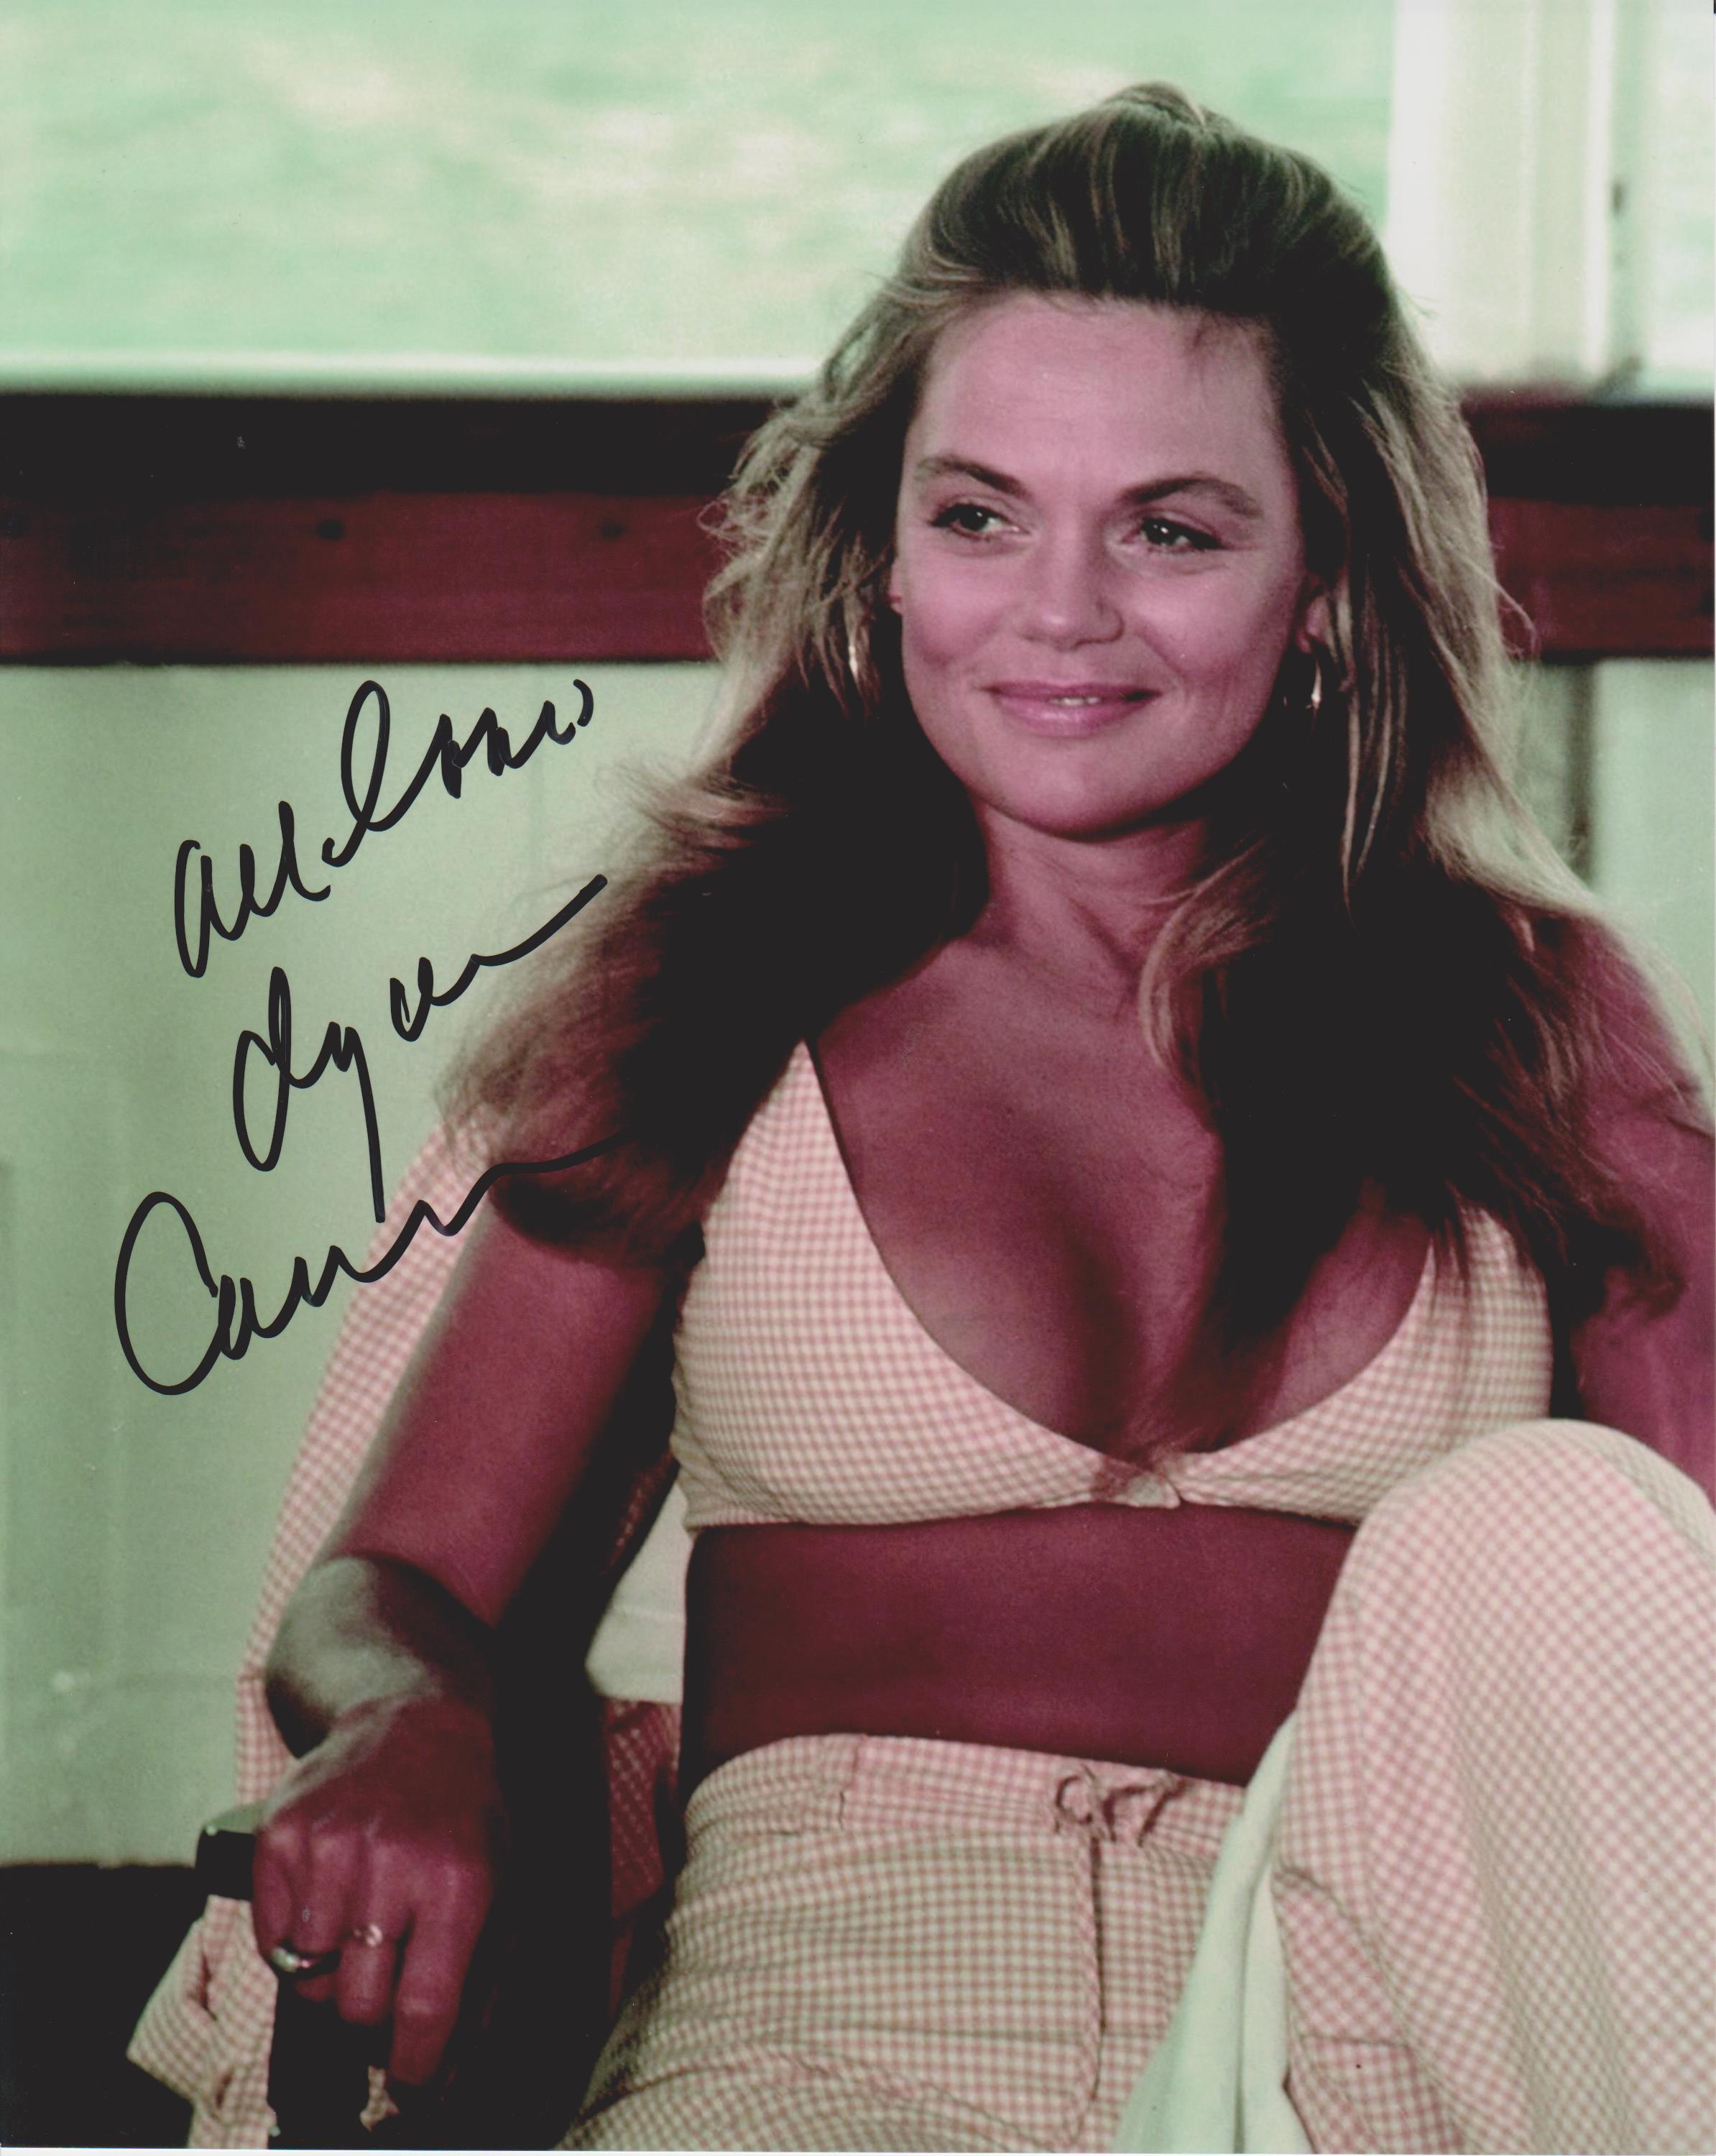 Dyan picture cannon of DYAN CANNON